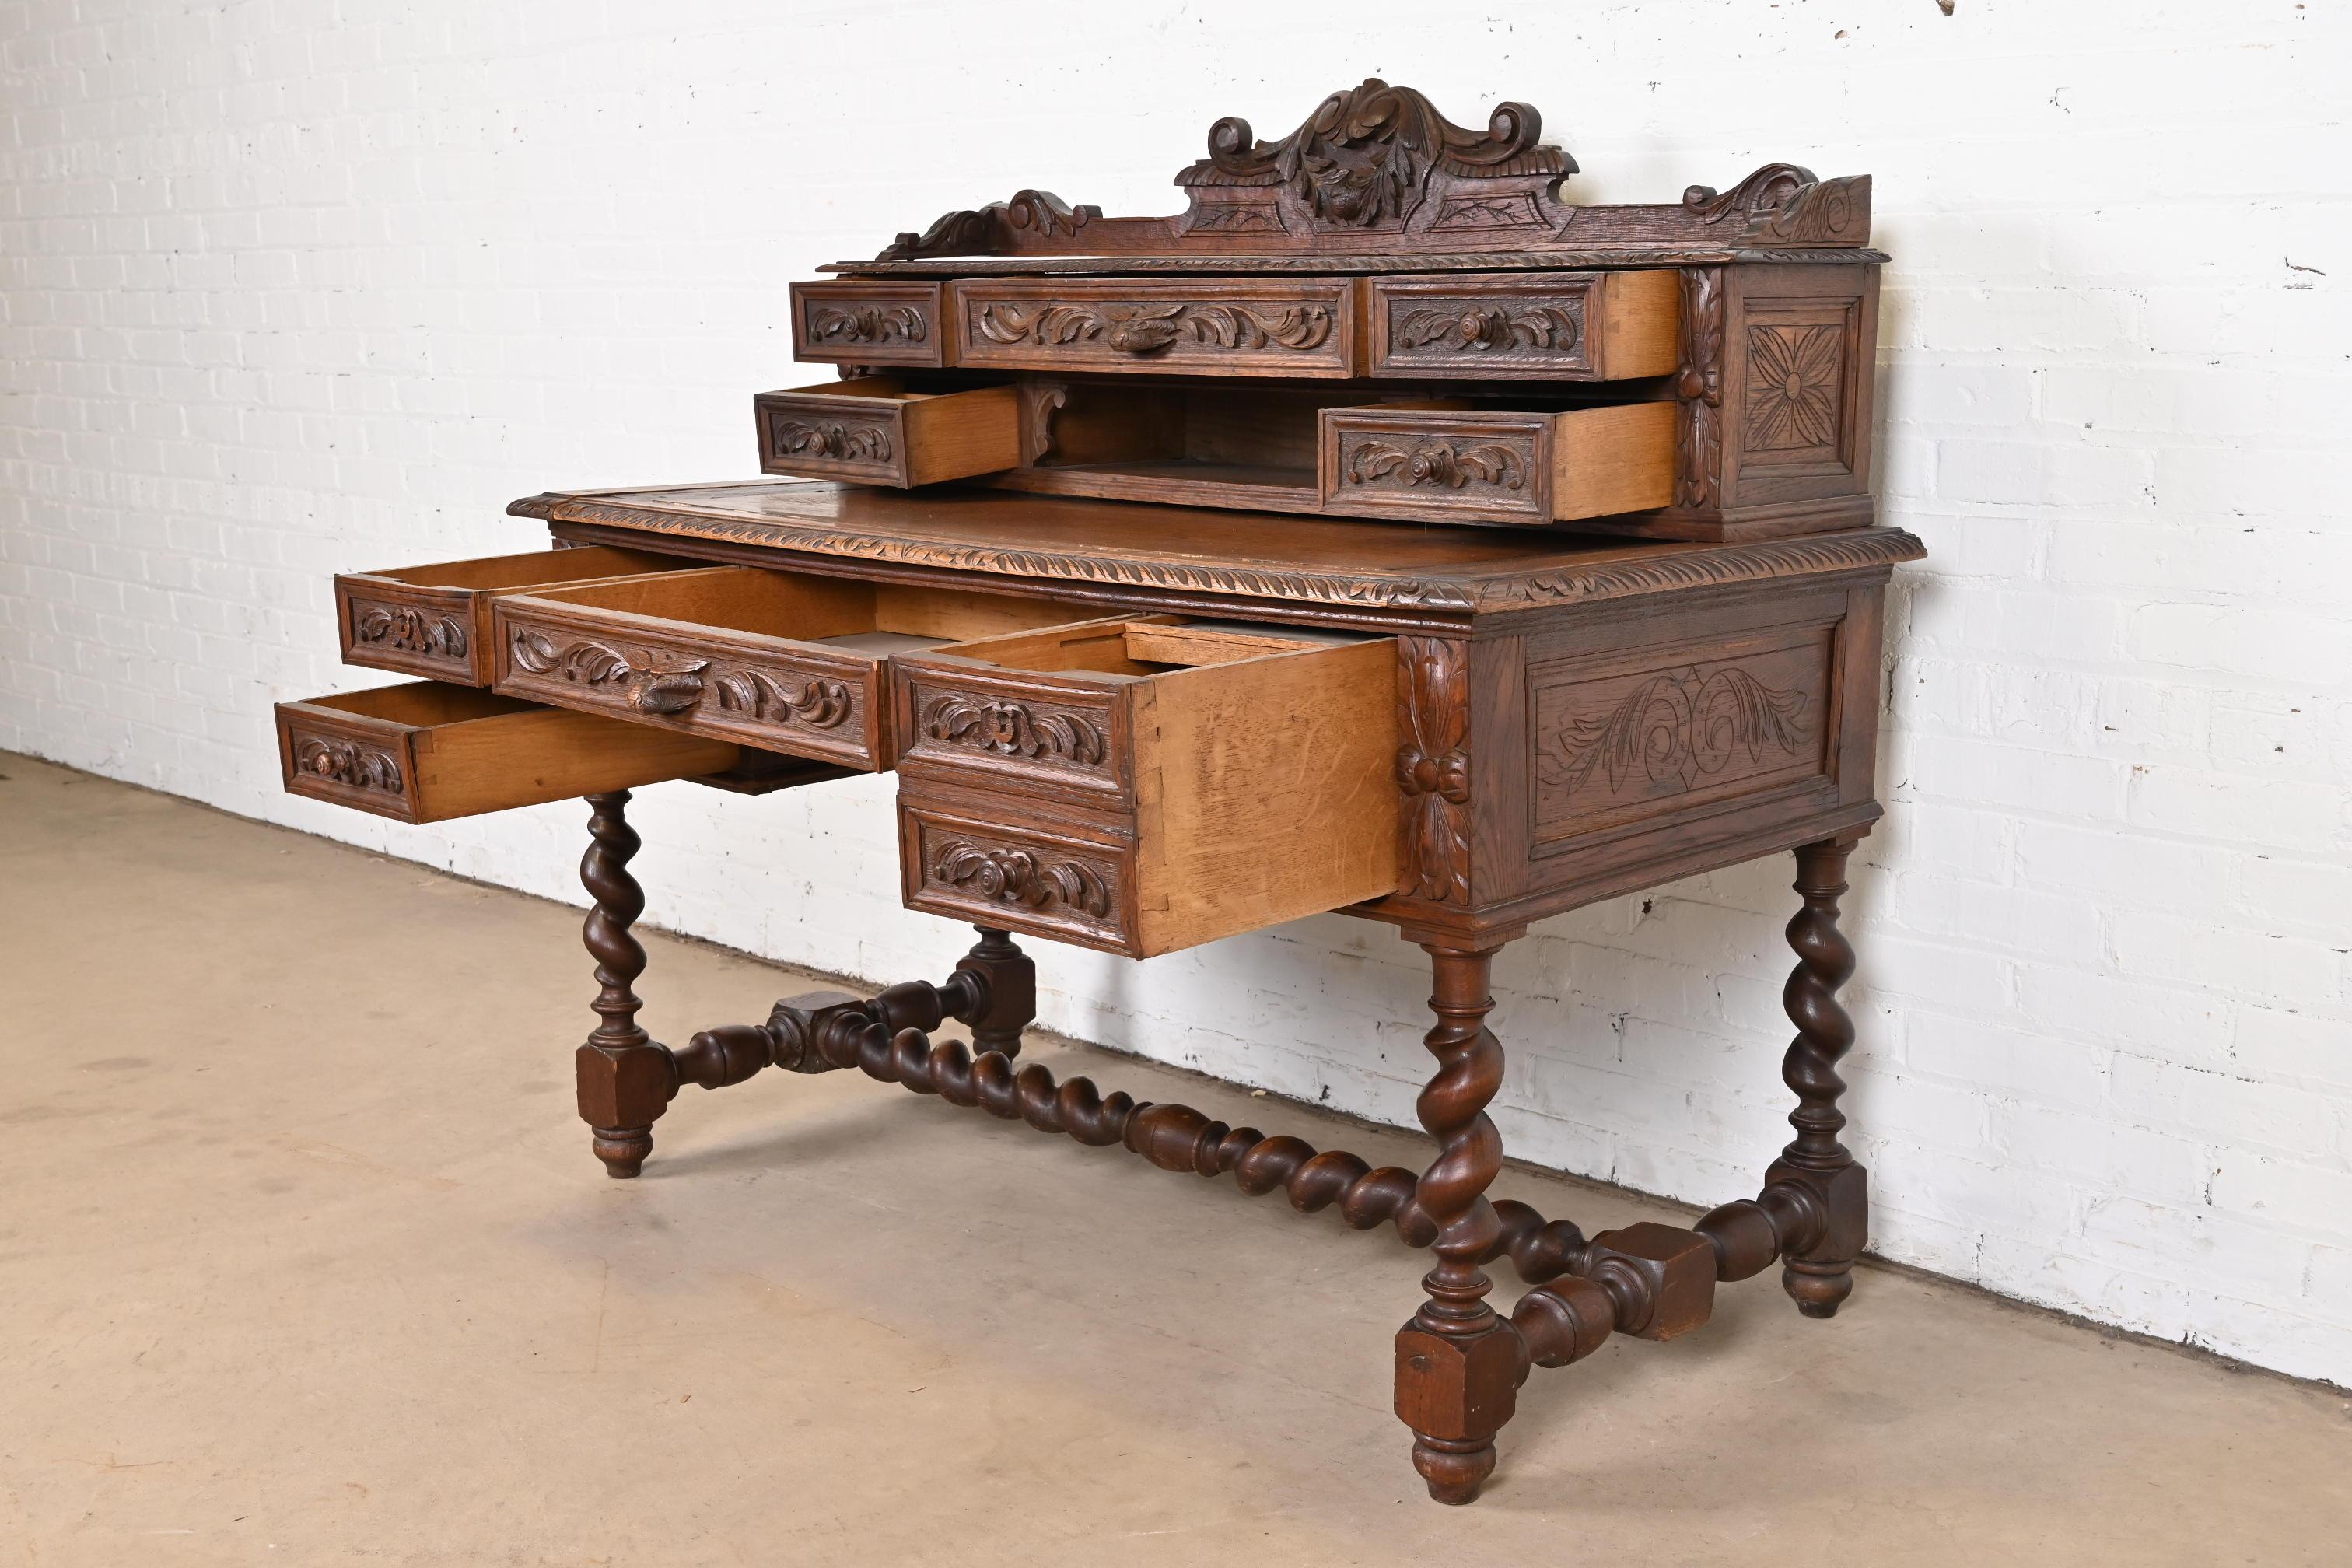 19th Century French Black Forest Carved Oak Writing Desk With Barley Twist Legs For Sale 9